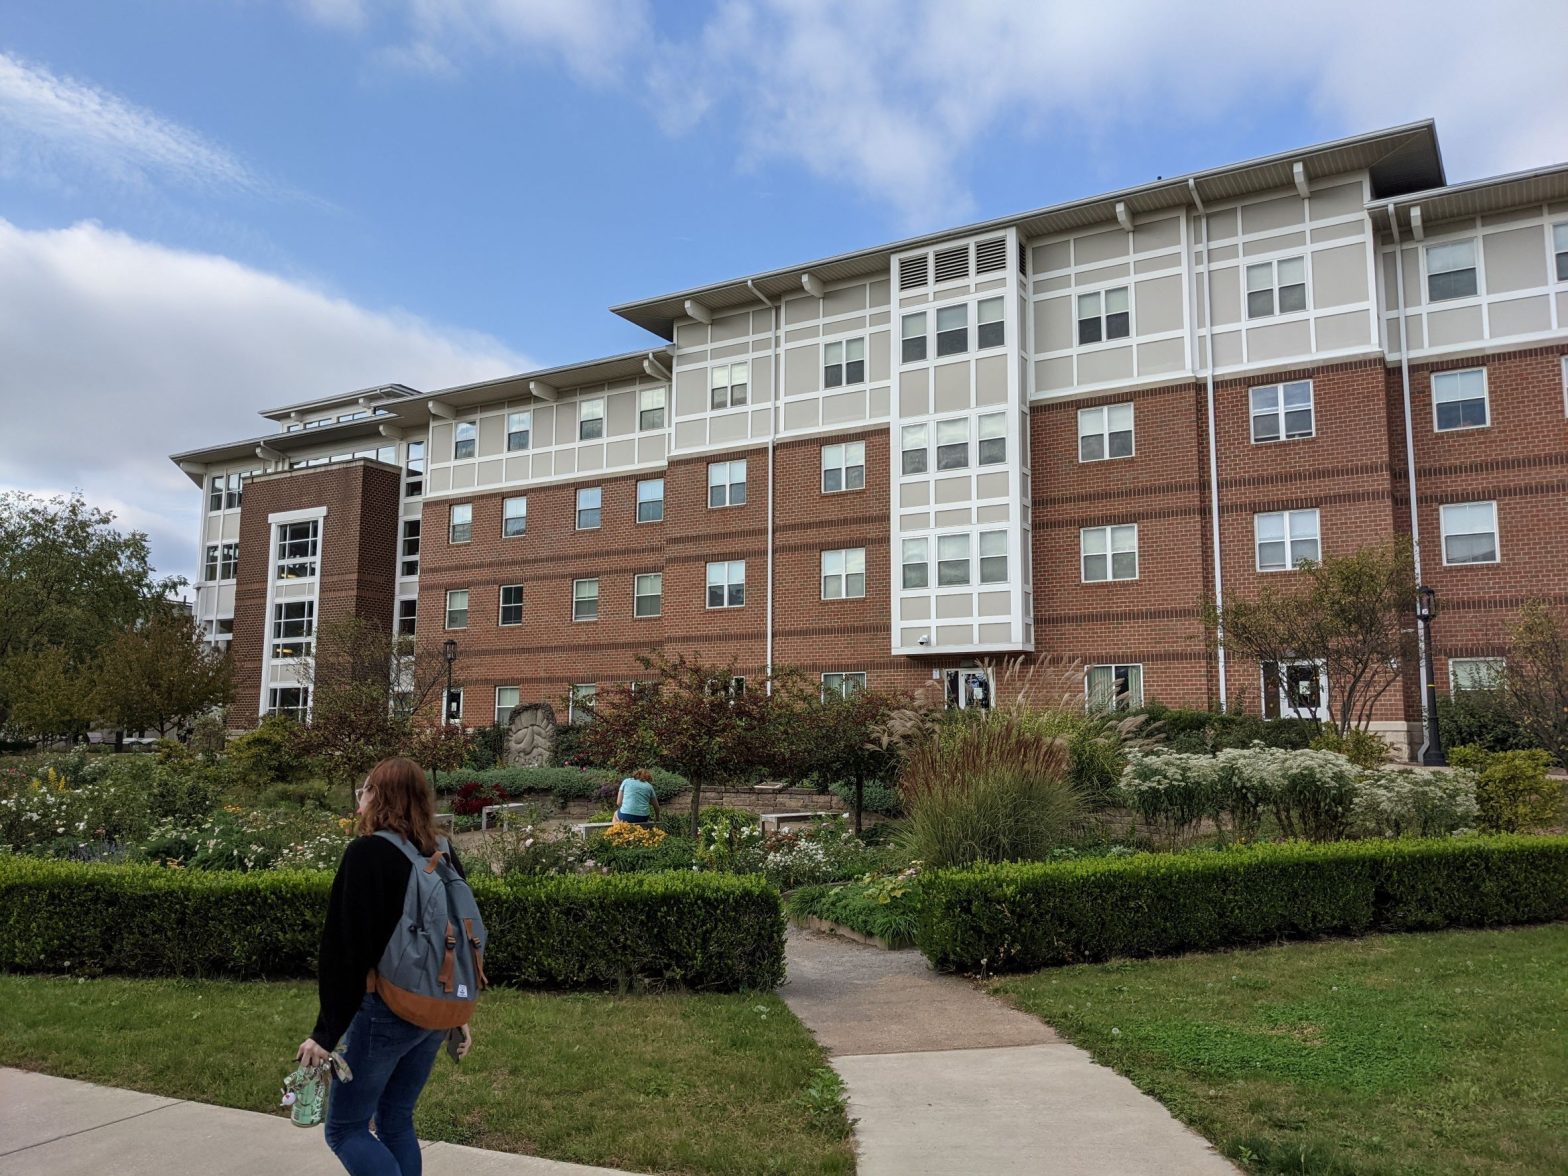 Arts and crafts style living learning student housing community dormitory buildingwith pink brick and white trims with large garden and student walking in foreground